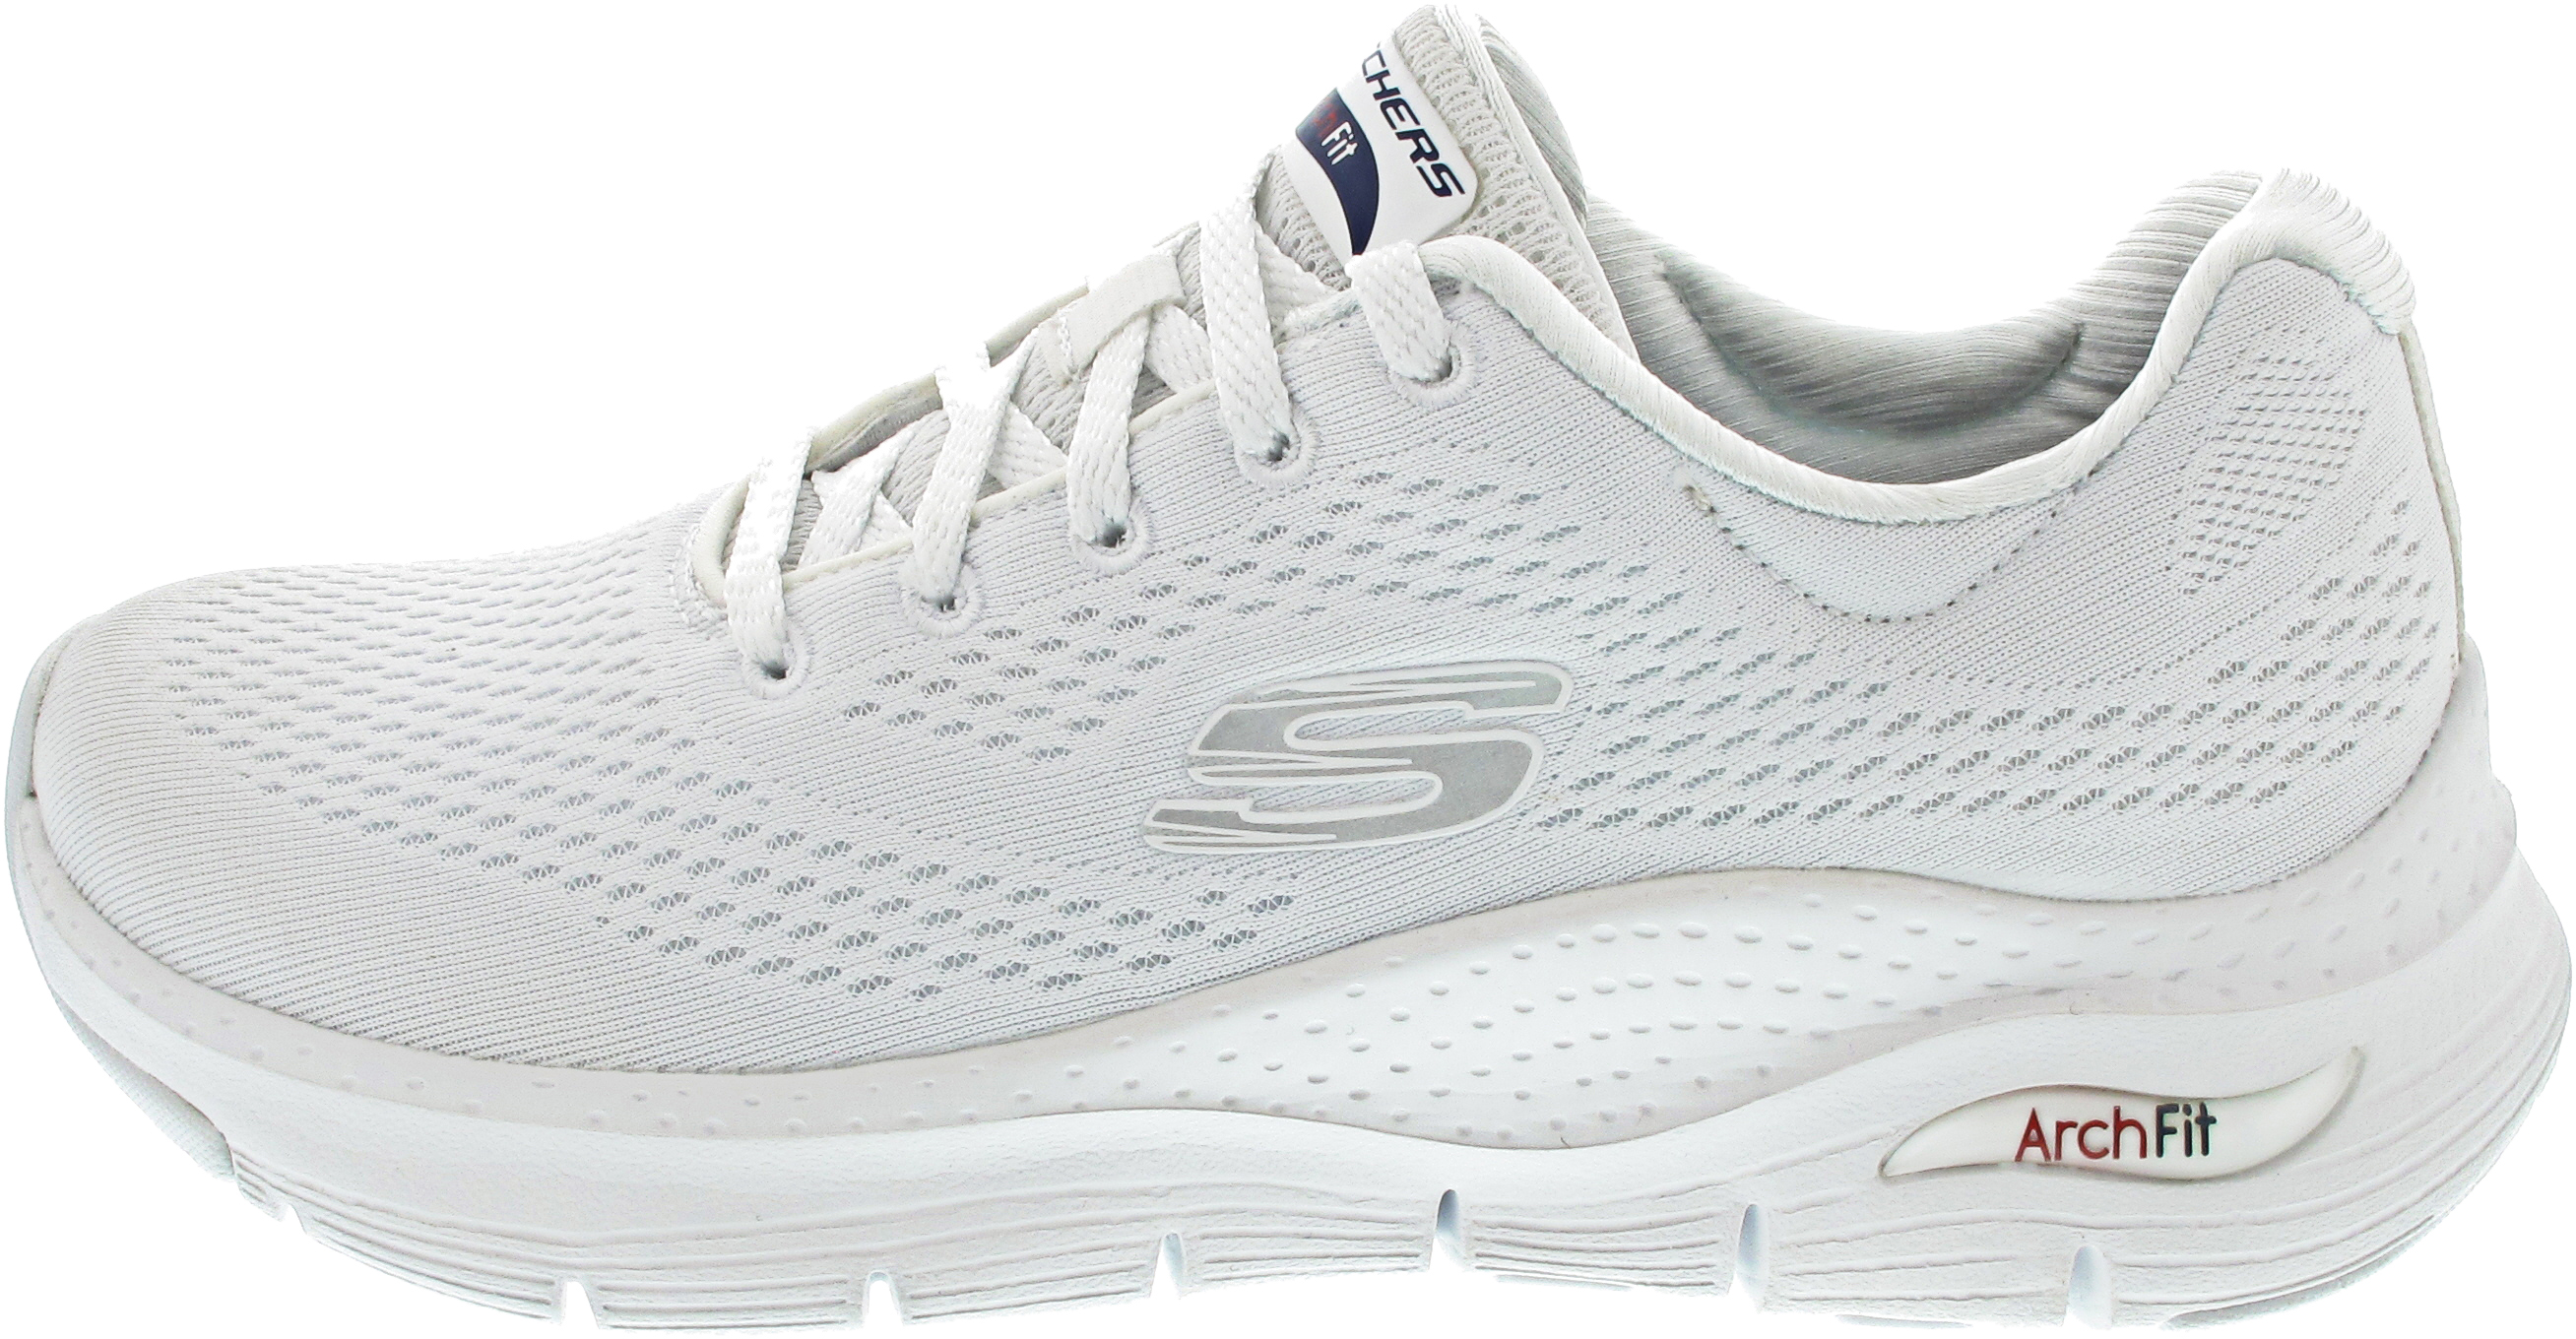 Skechers Arch Fit-Big Appeal